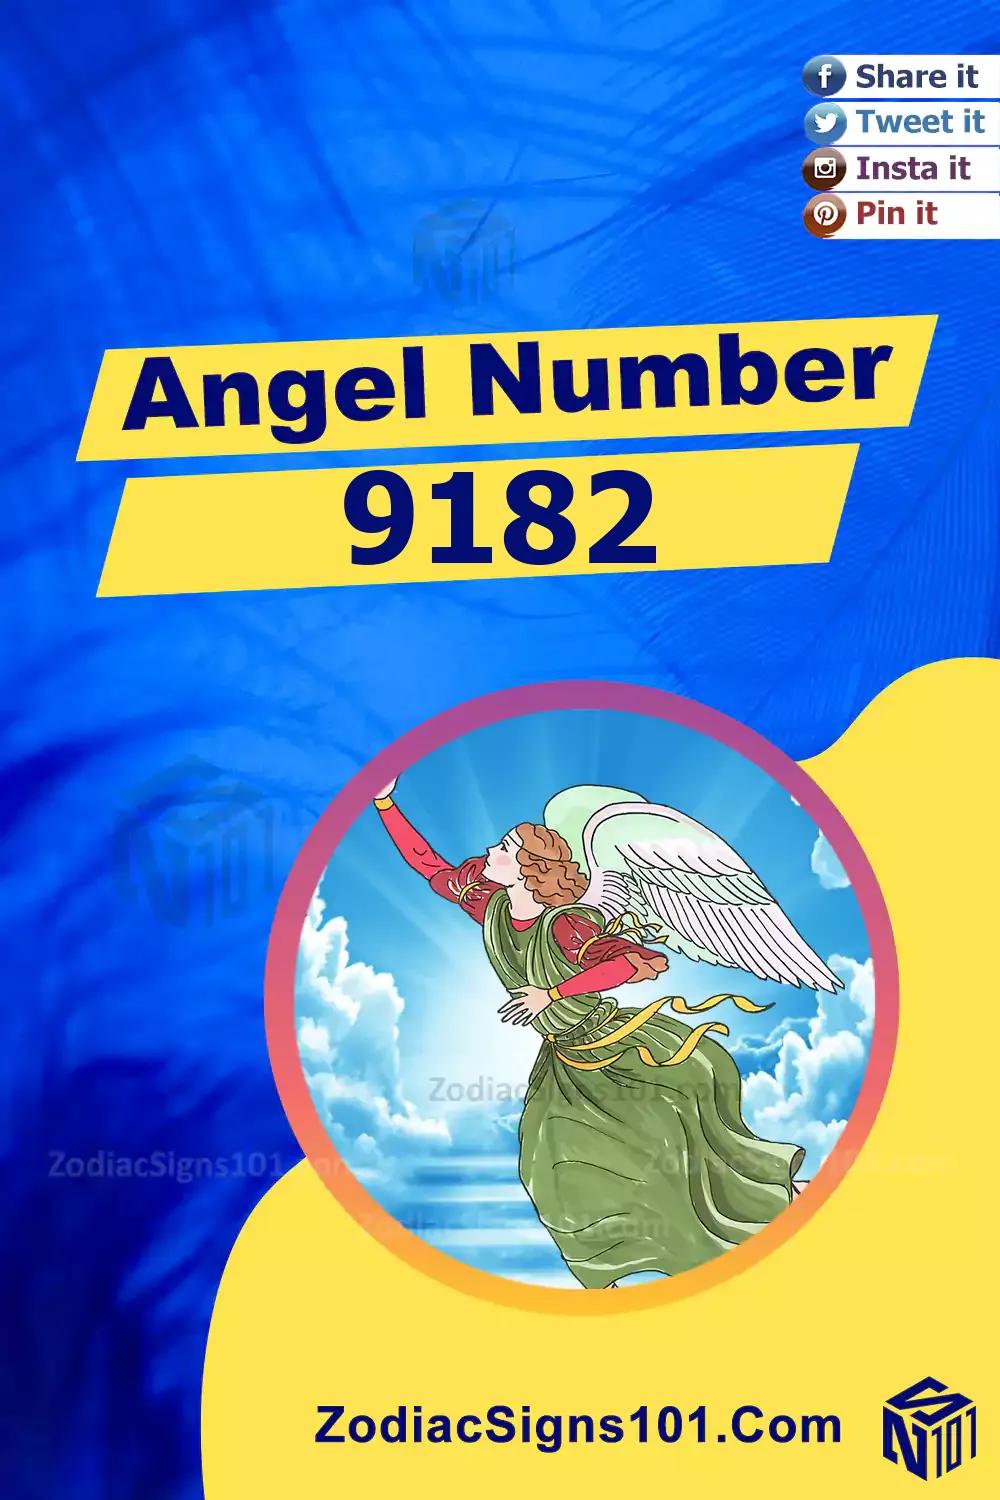 9182 Angel Number Meaning